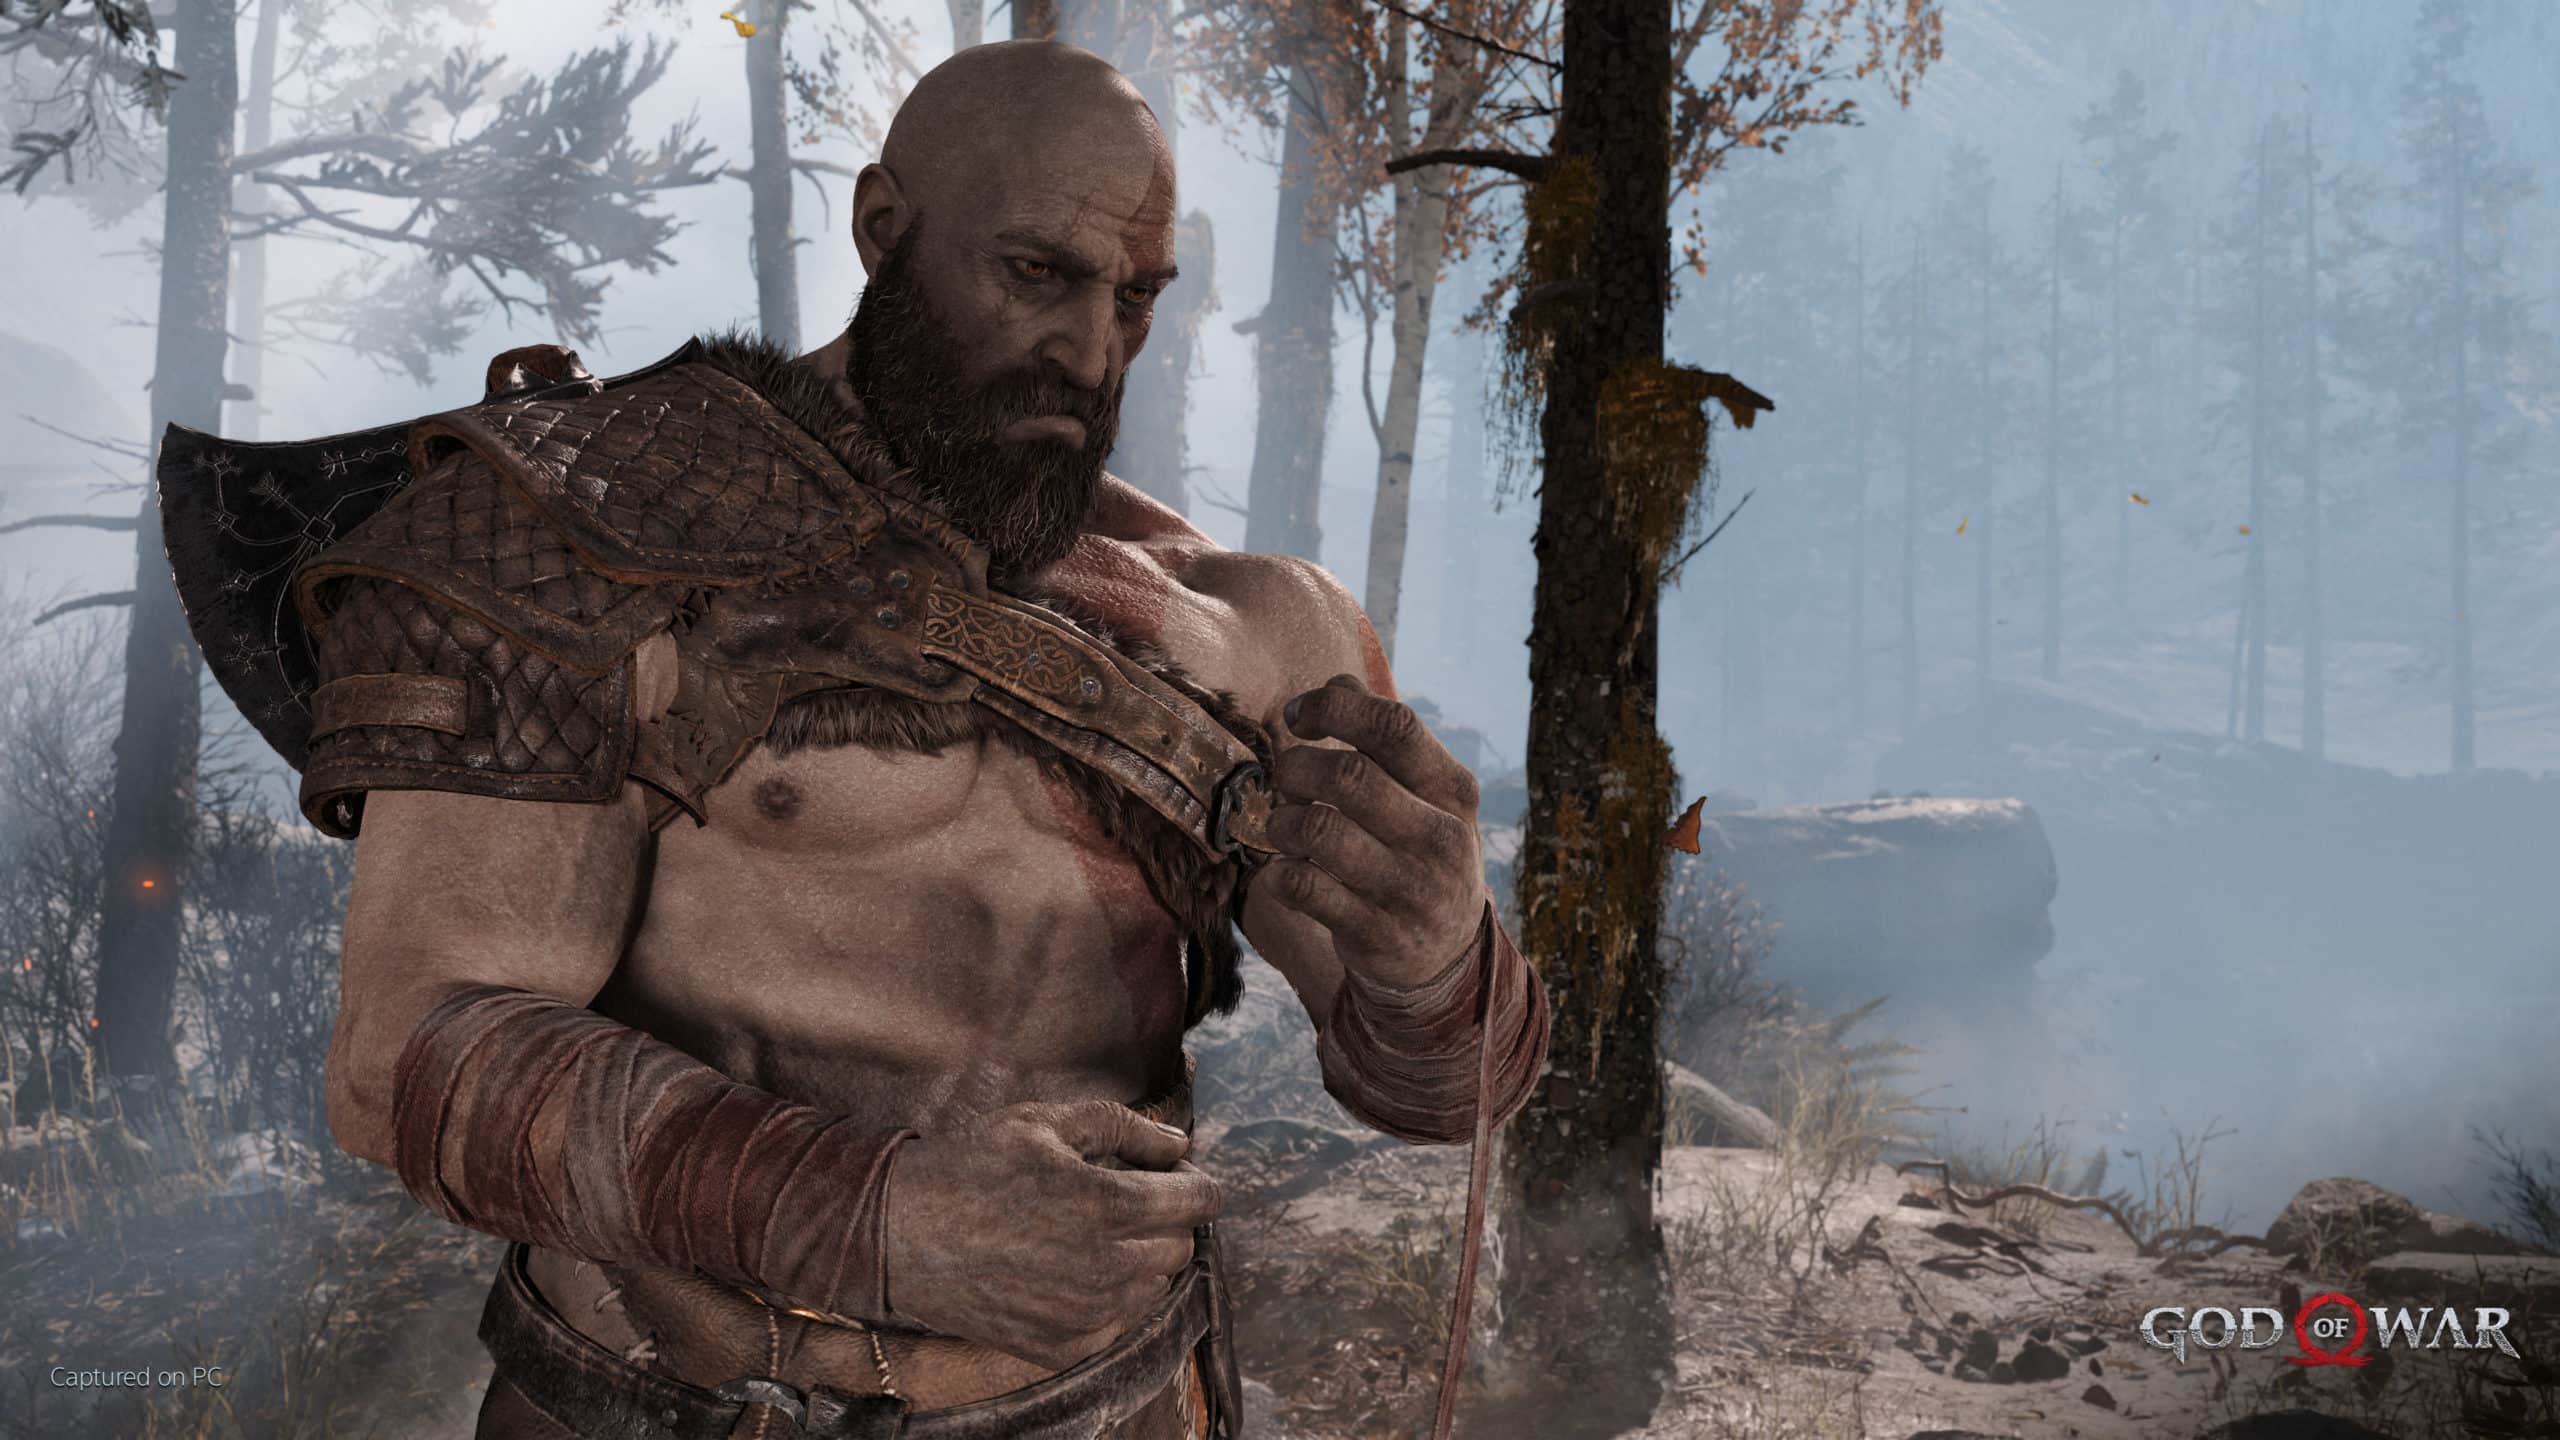 God of War screenshot from the Steam page